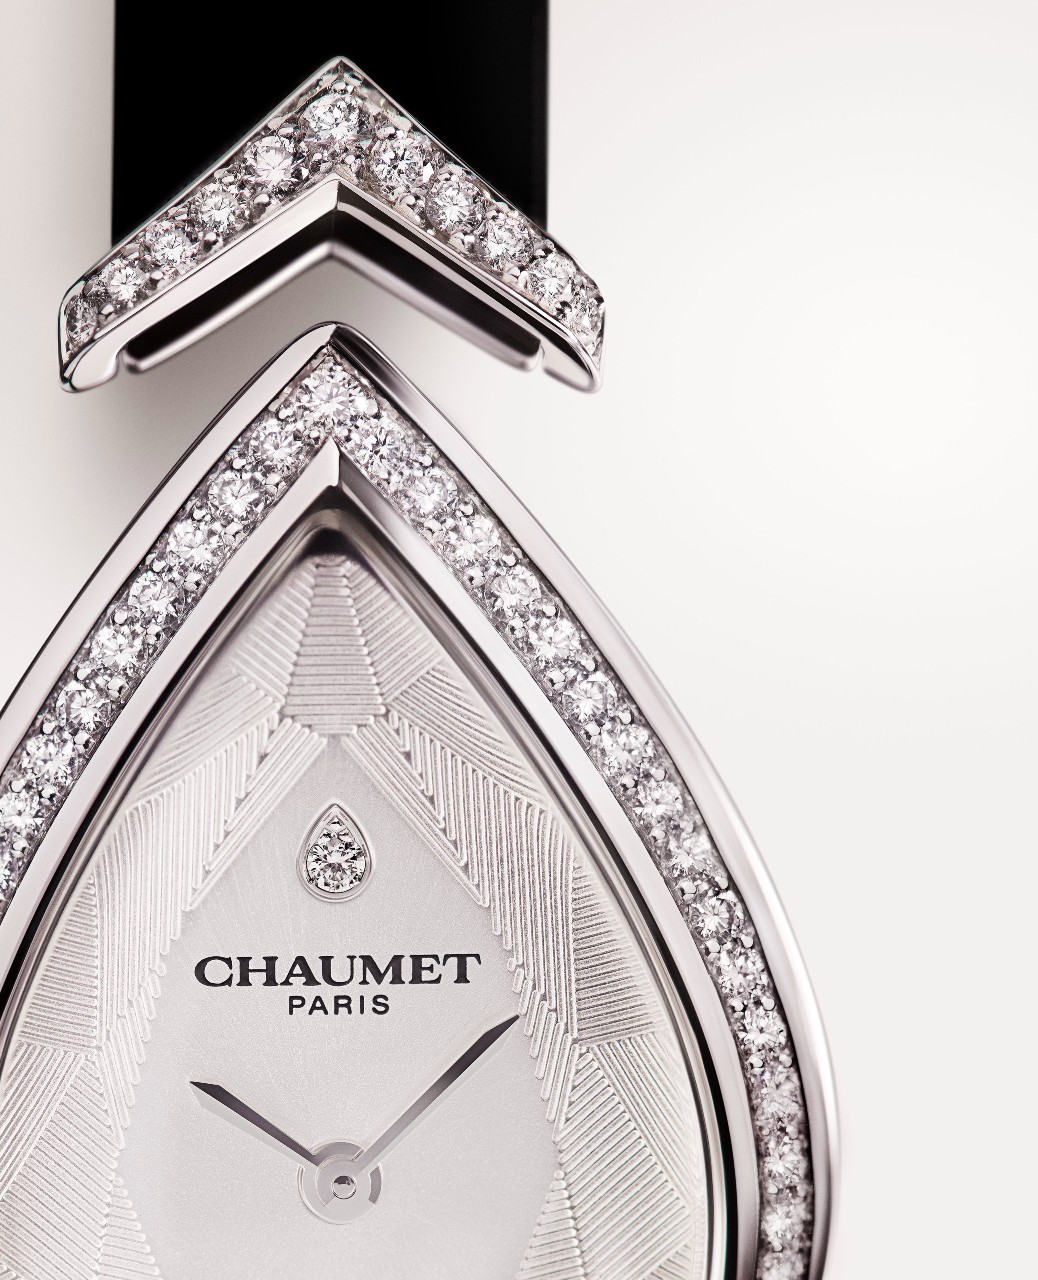 Maison Chaumet presents its new High Jewellery Collection @Jewellery